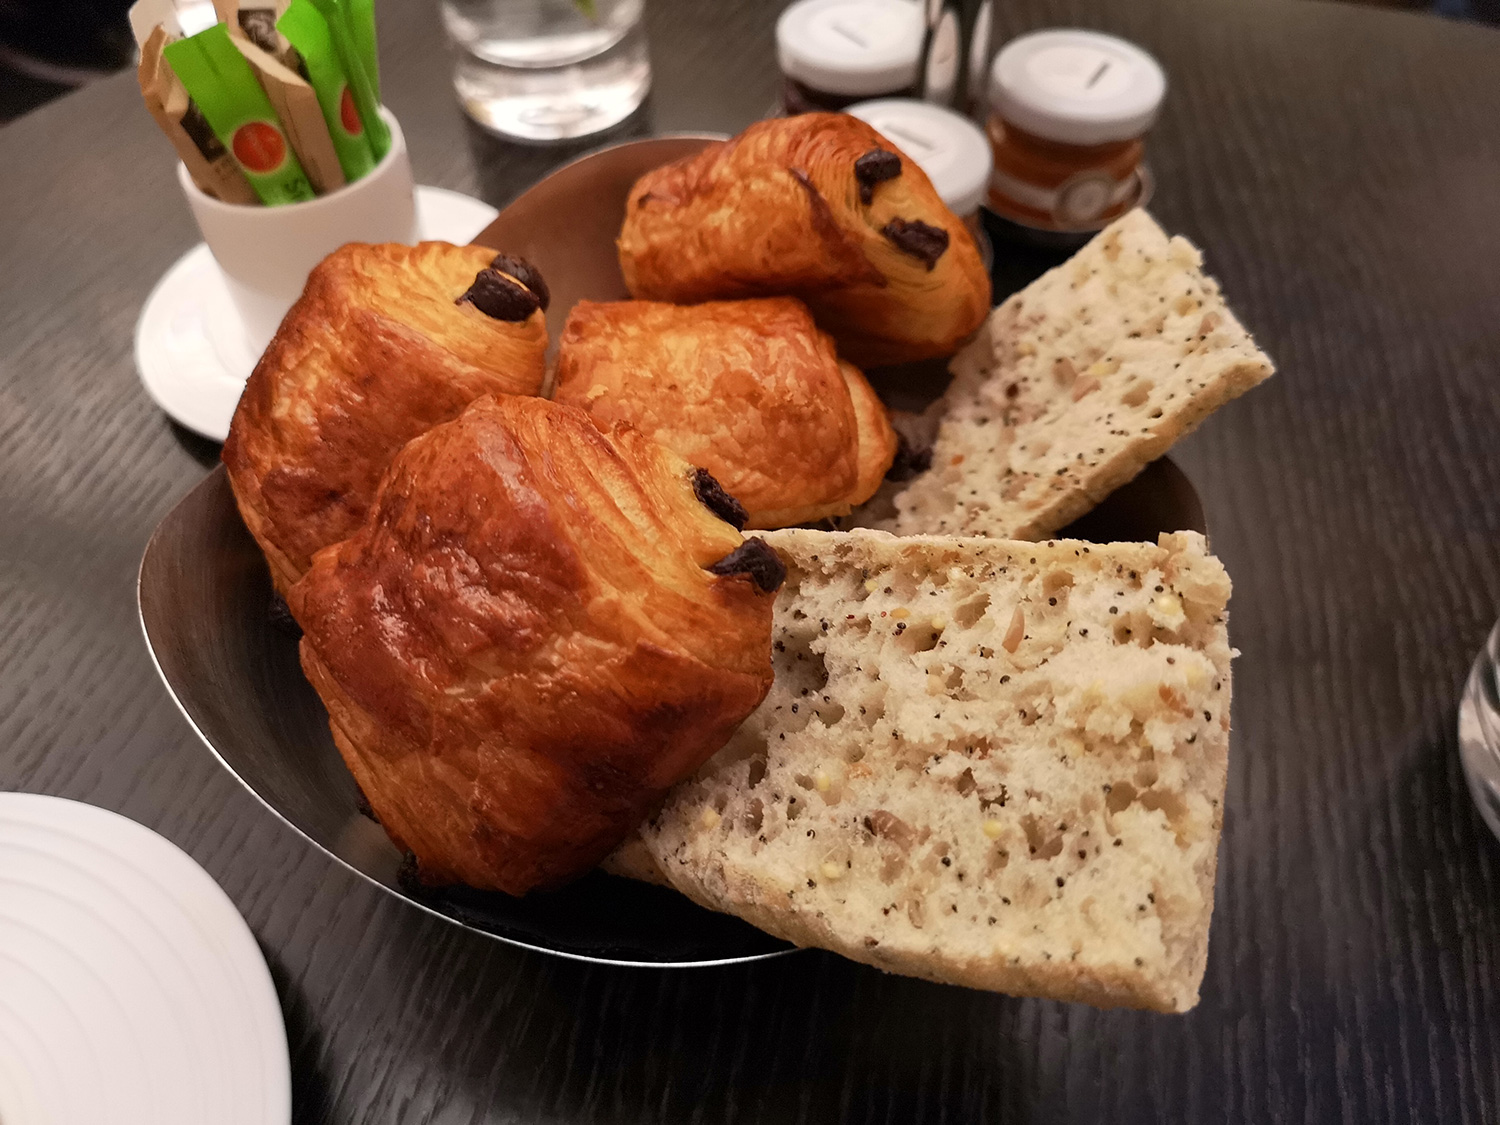 huawei p20 pro review sample photo food